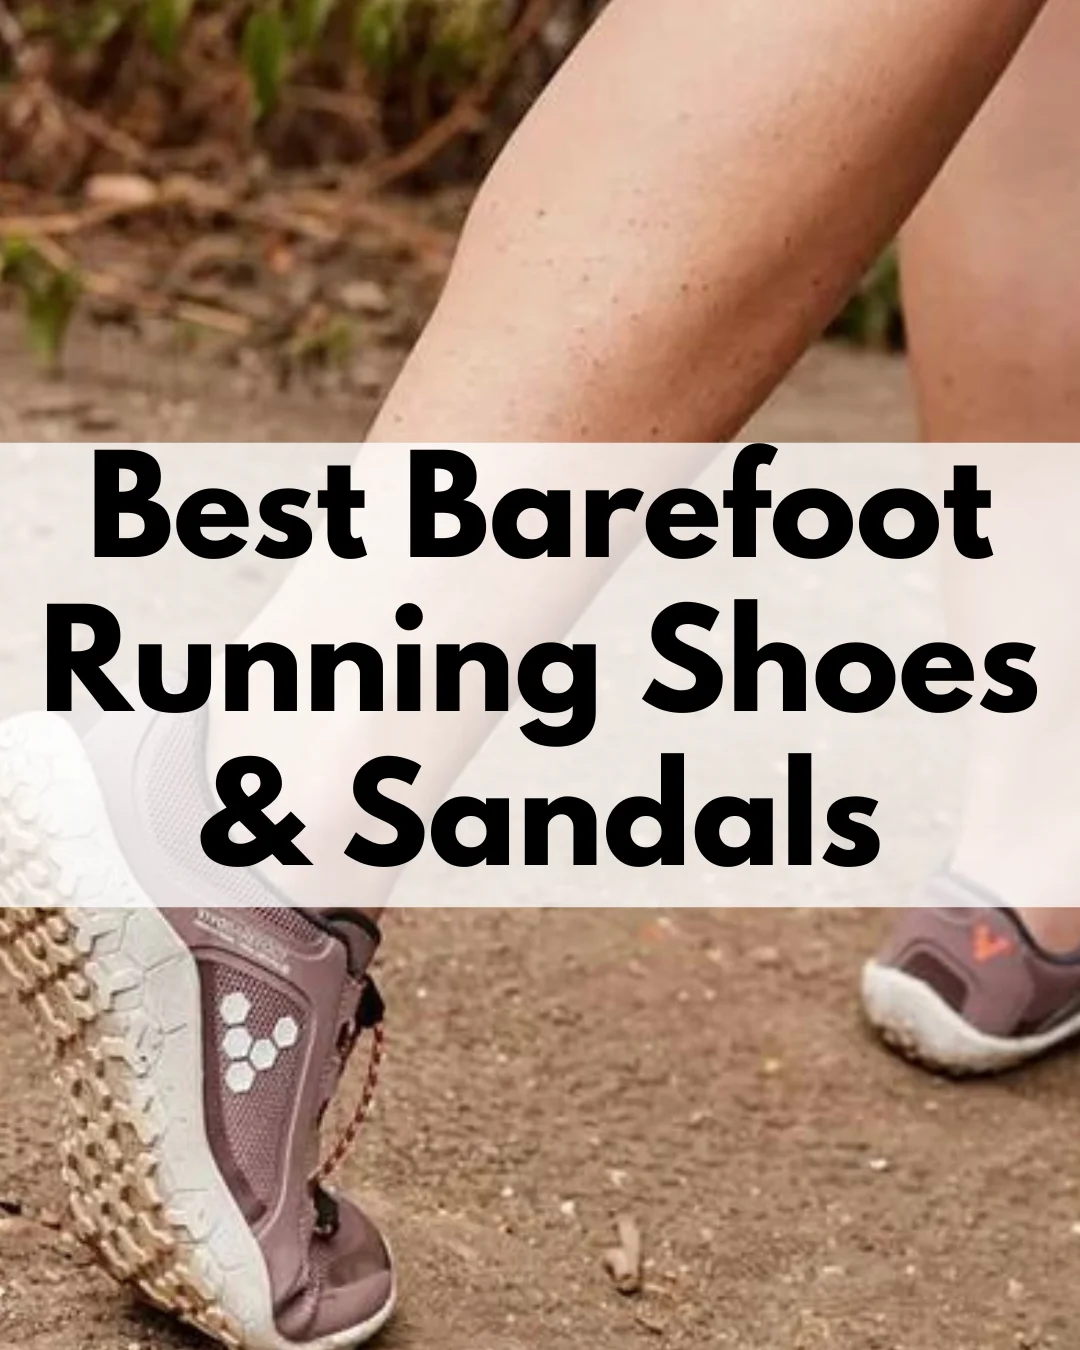 which barefoot running shoe is best